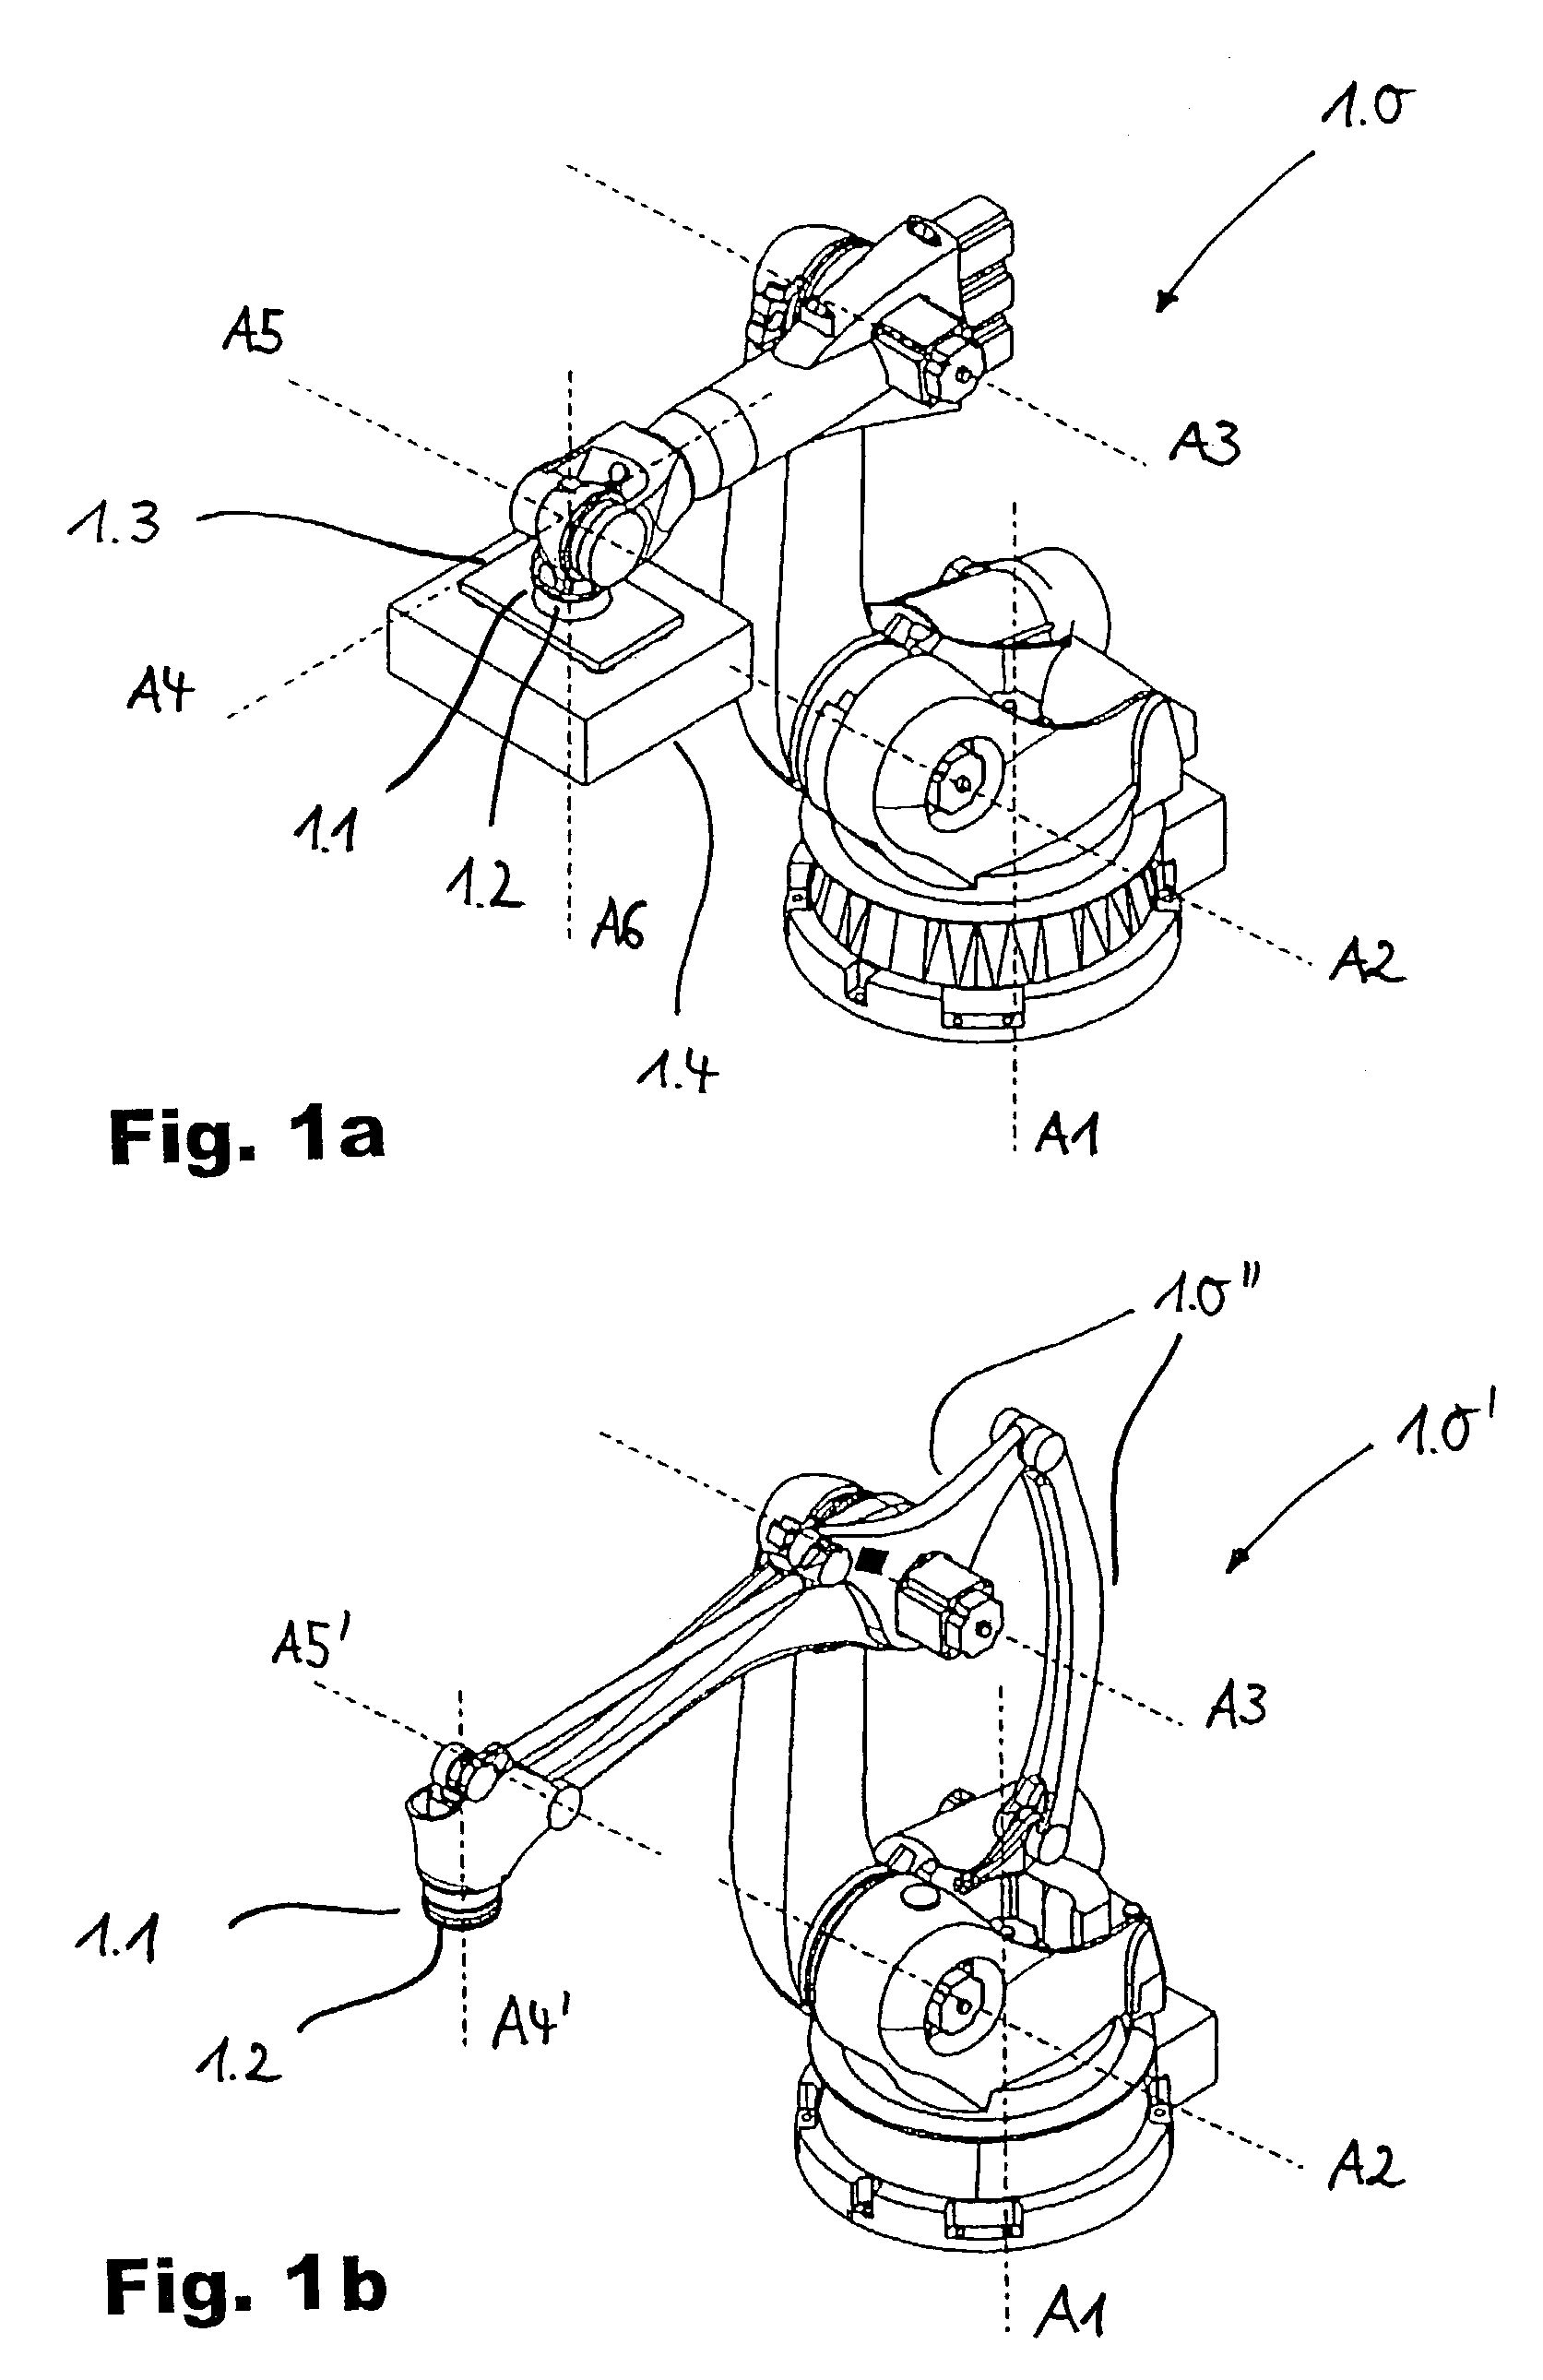 Method and apparatus for moving a handling system